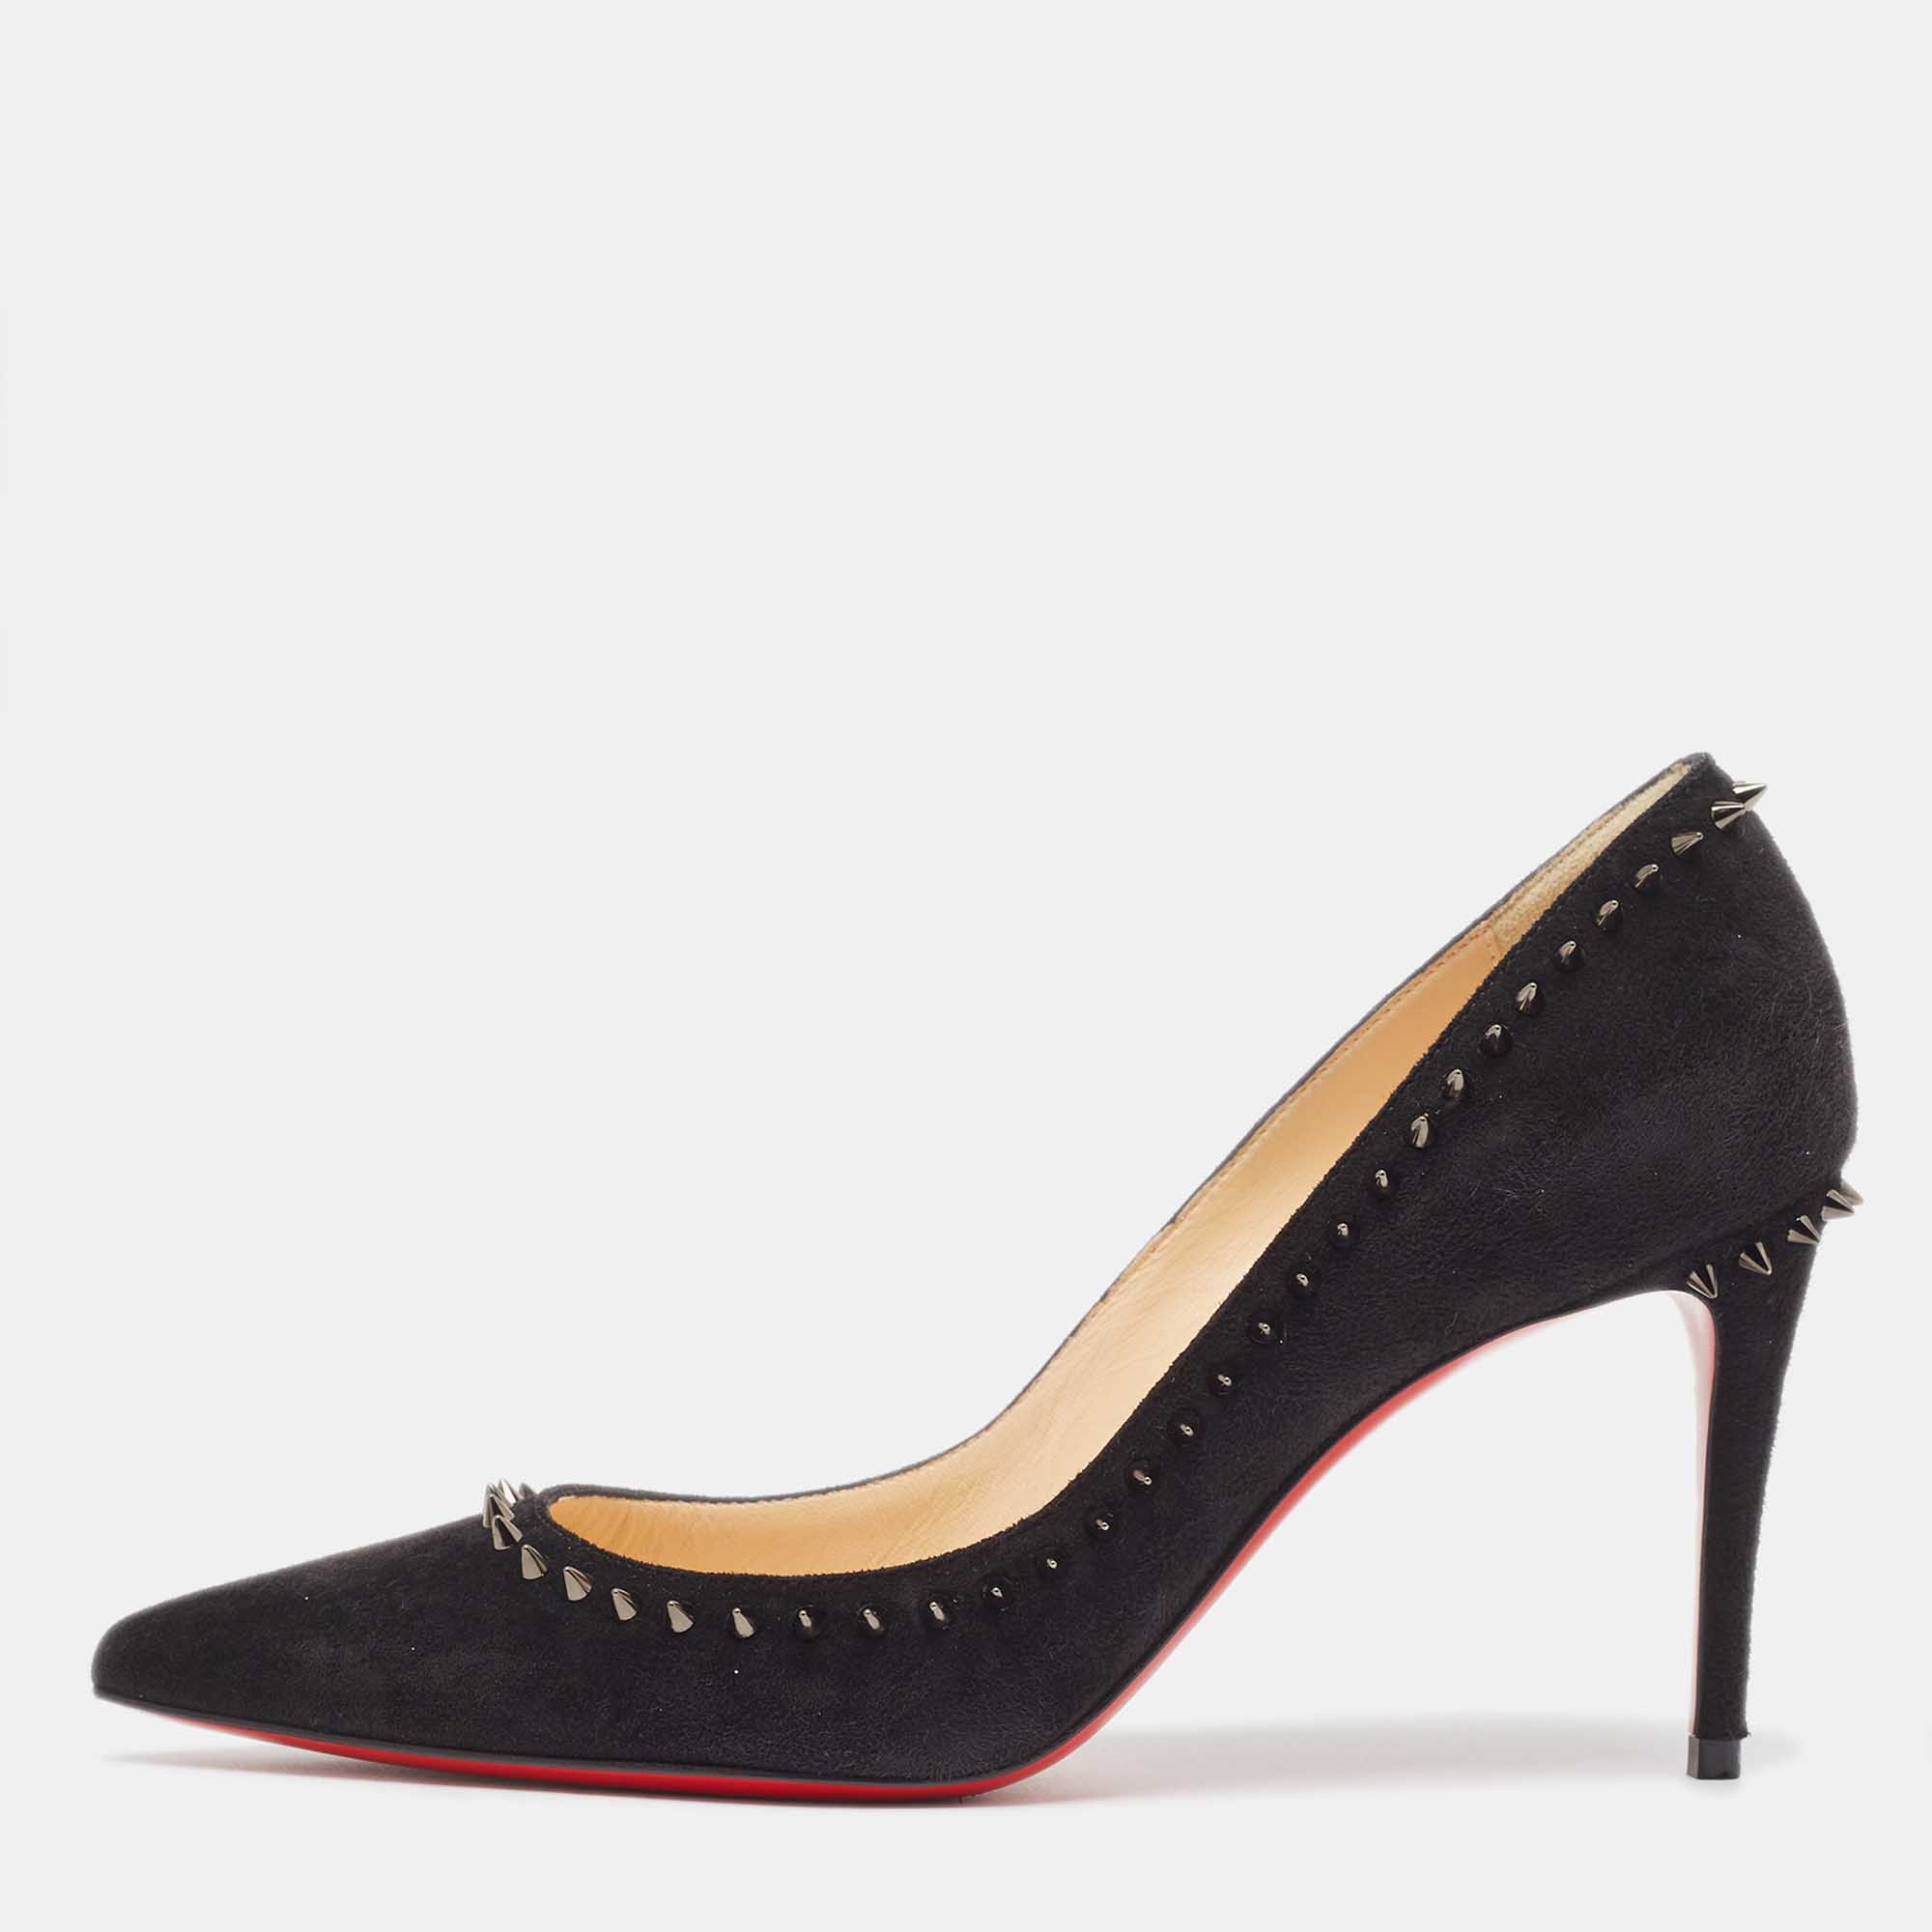 Pre-owned Christian Louboutin Black Suede Anjalina Pumps Size 35.5